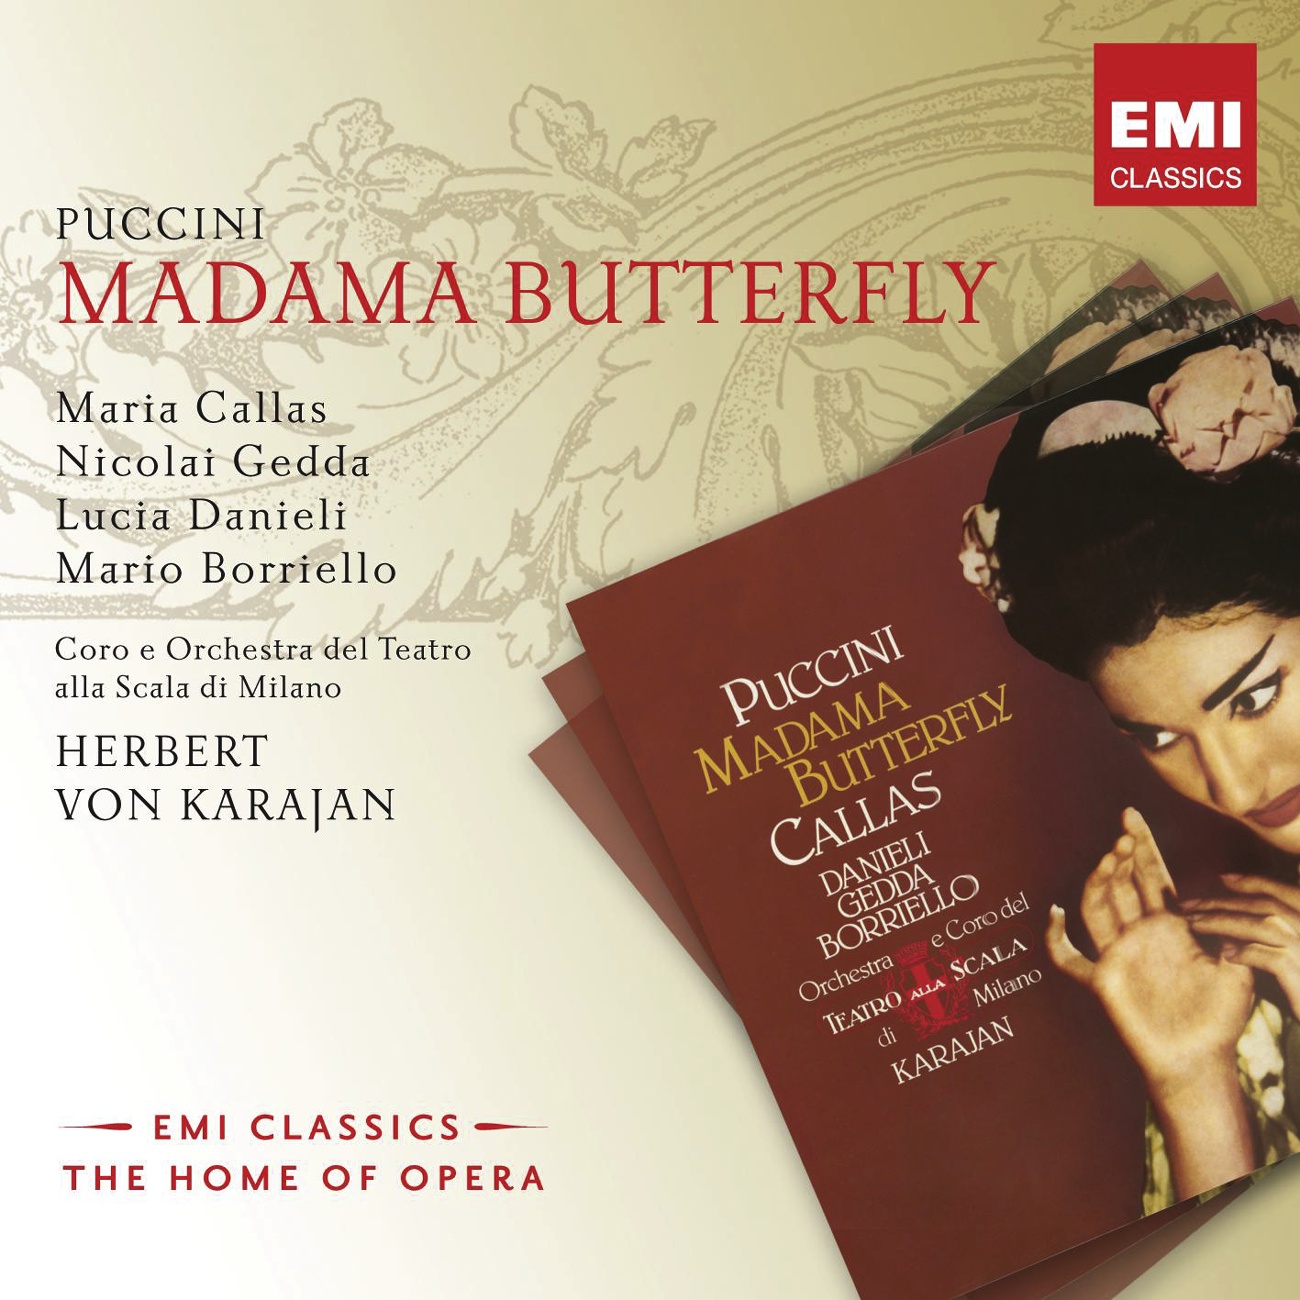 Madama Butterfly (2008 Remastered Version), Act II, First Part: Vespa! Rospo maledetto!